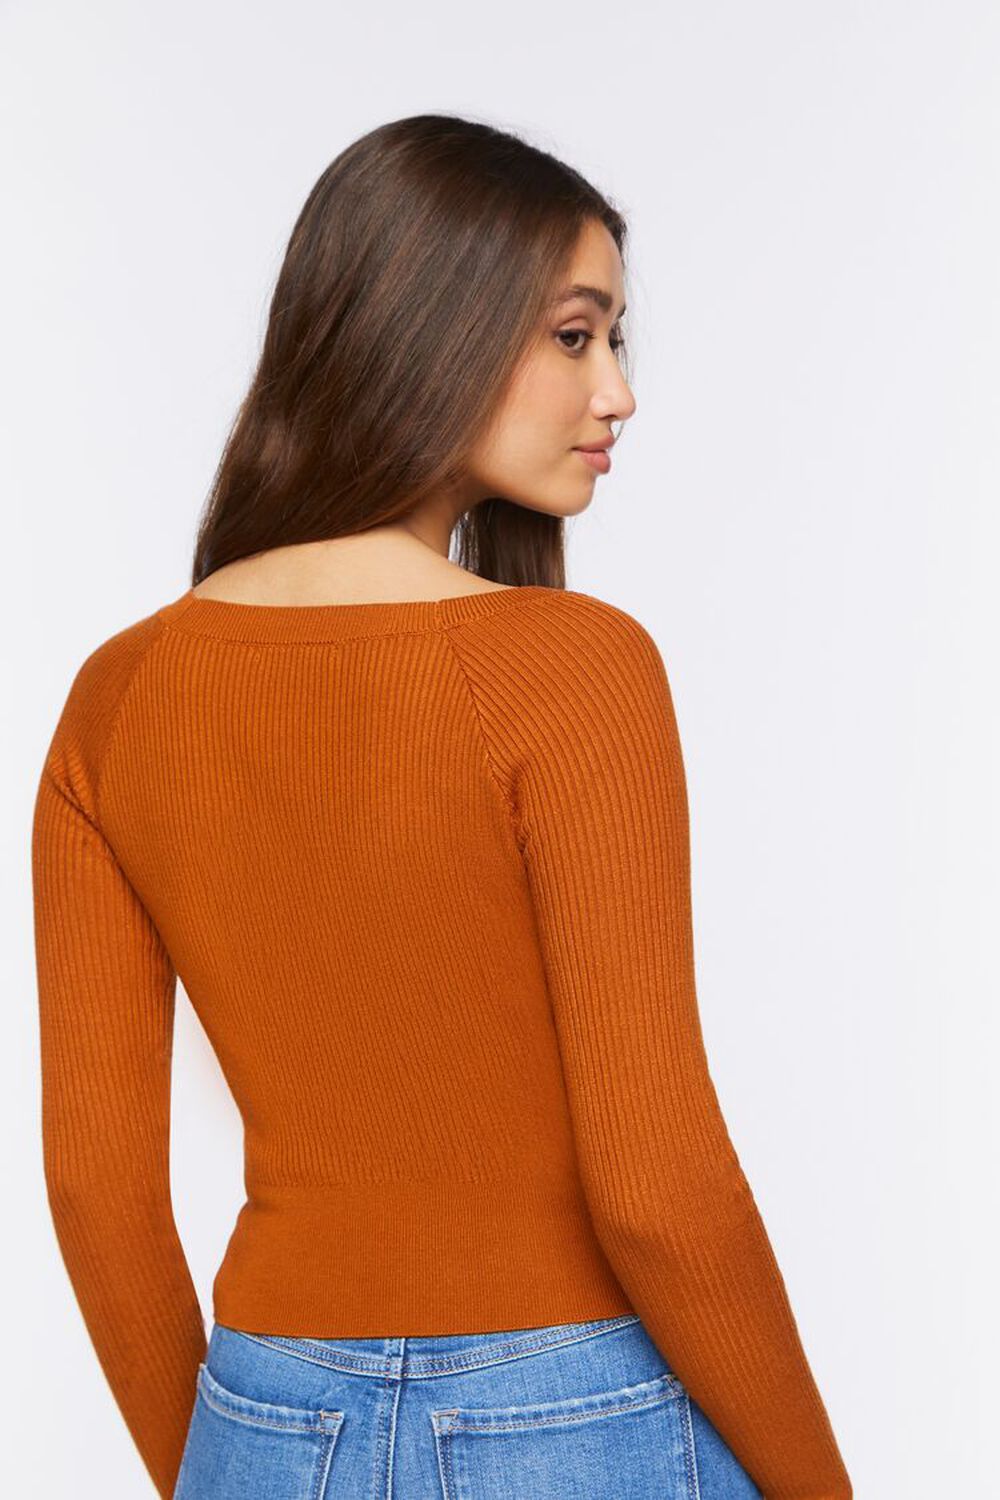 Ribbed Scoop-Neck Sweater, image 3